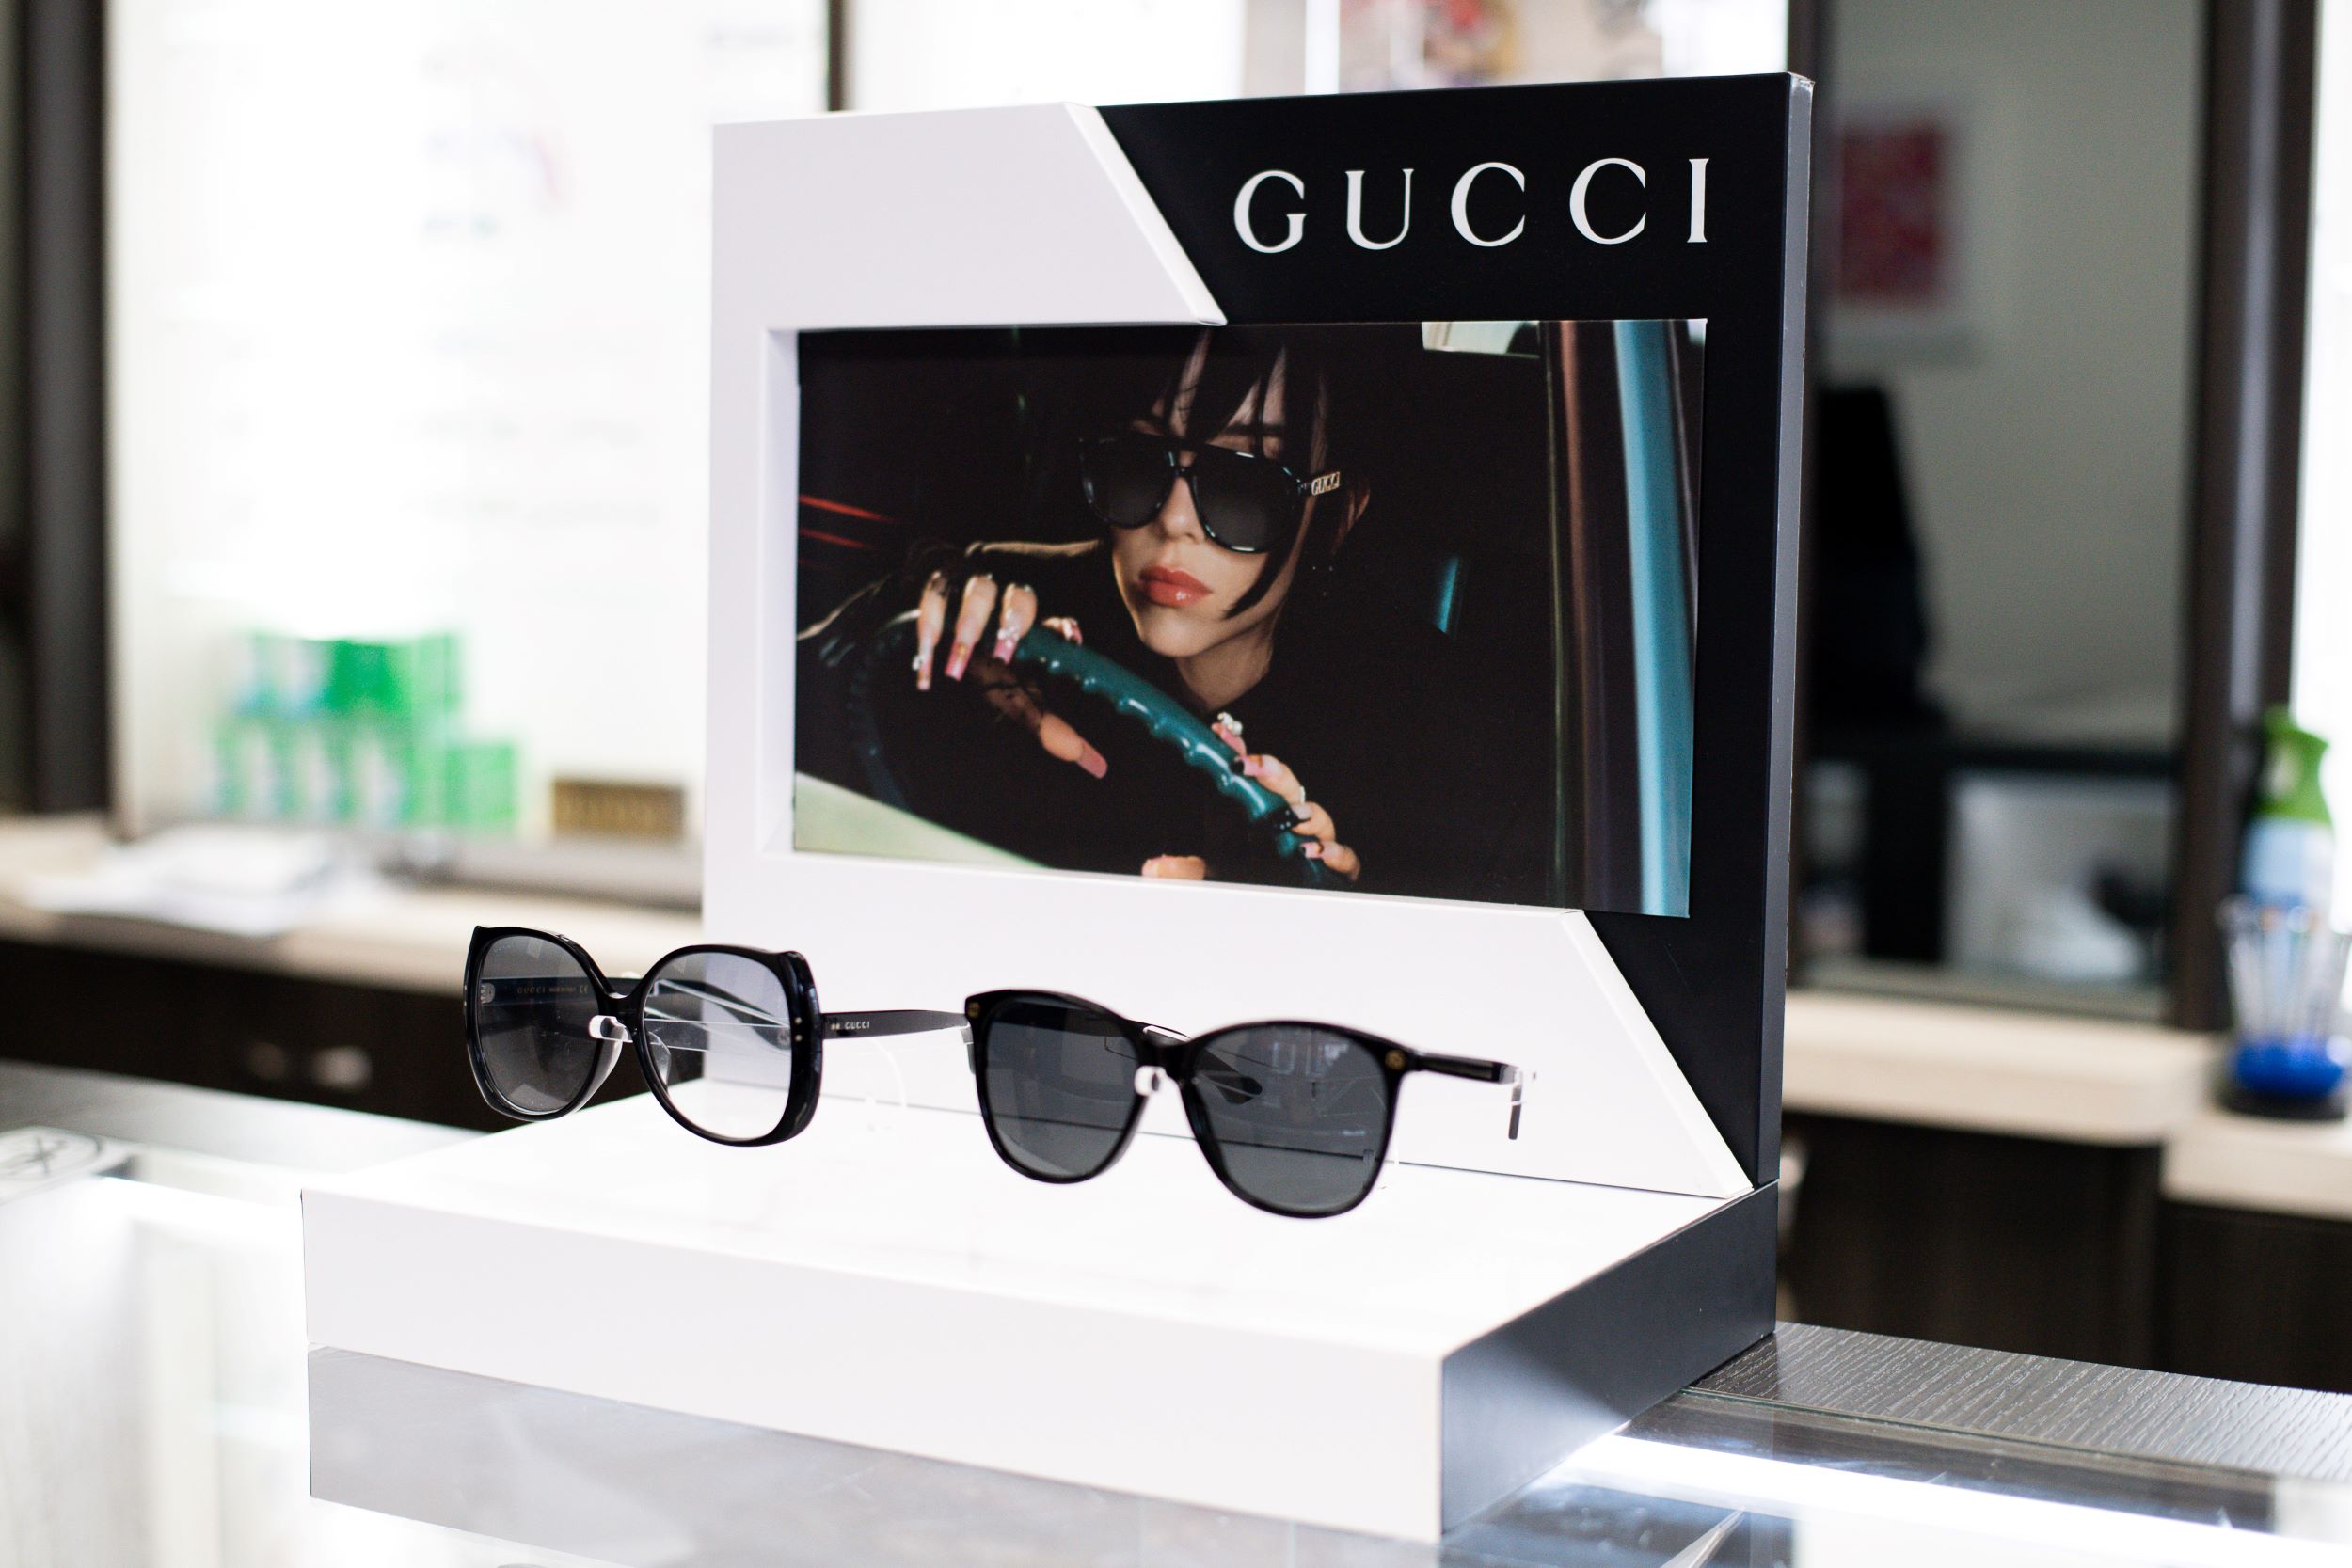 A display stand for gucci sunglasses featuring a black and white poster with the brand name and a photo of a woman wearing sunglasses. a pair of sunglasses rests in front on a white platform.